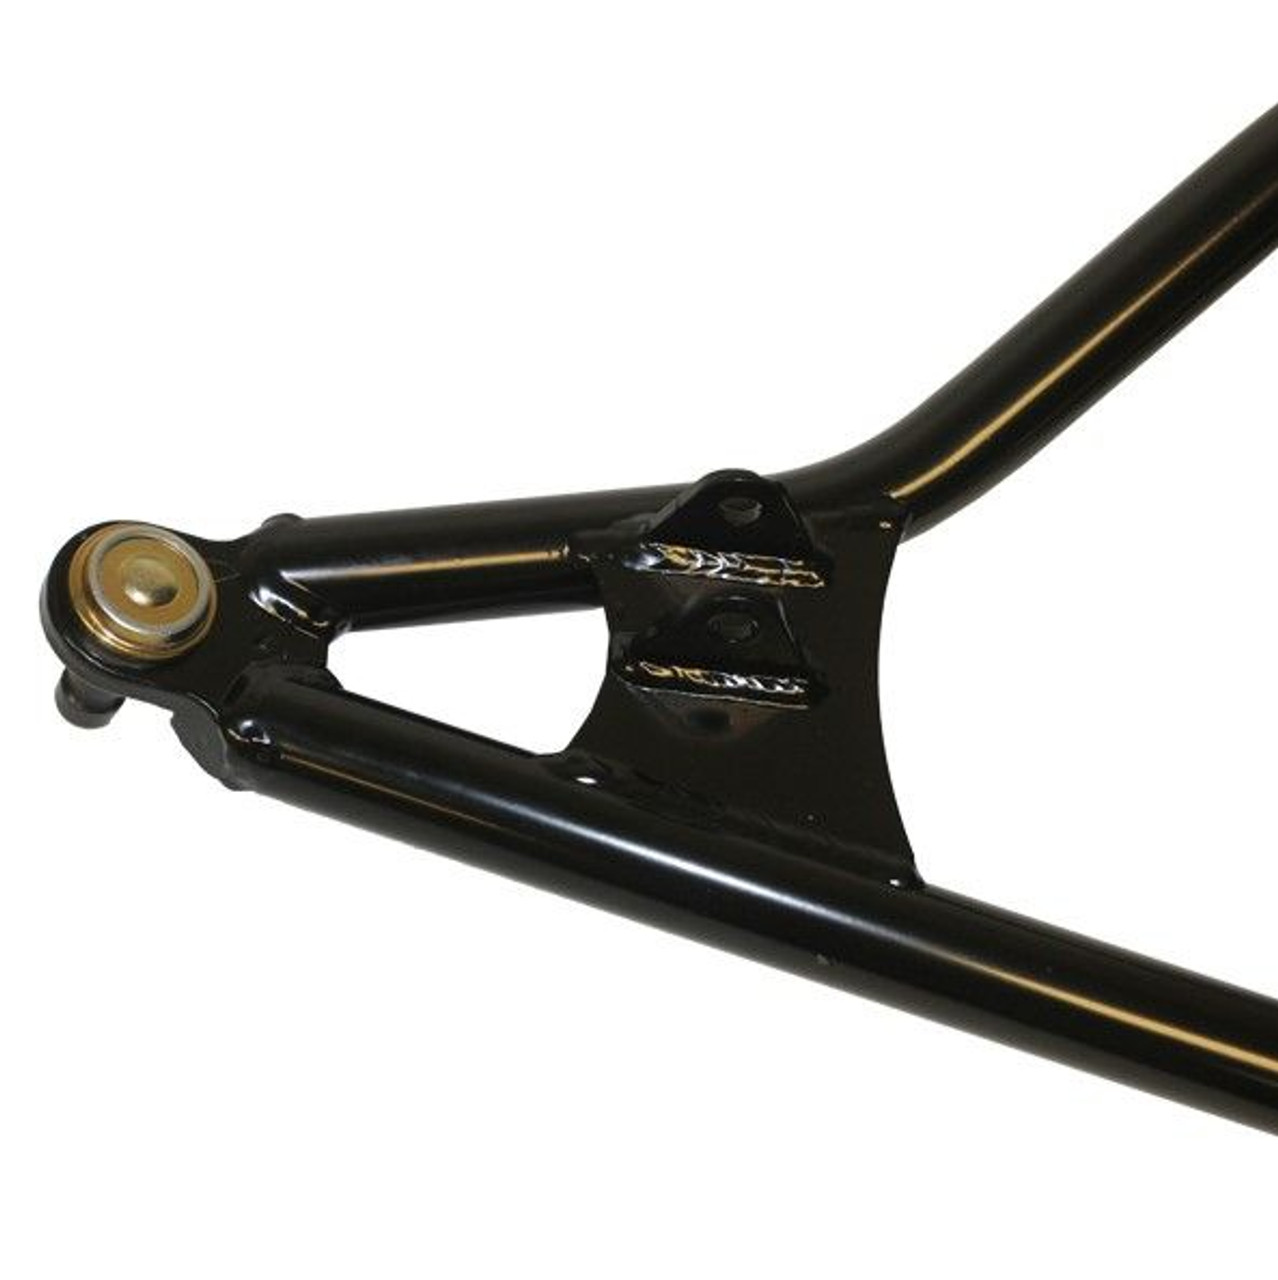 UTV Side X Side Max Clearance Front Forward Upper & Lower Control Arms Honda Pioneer 1000